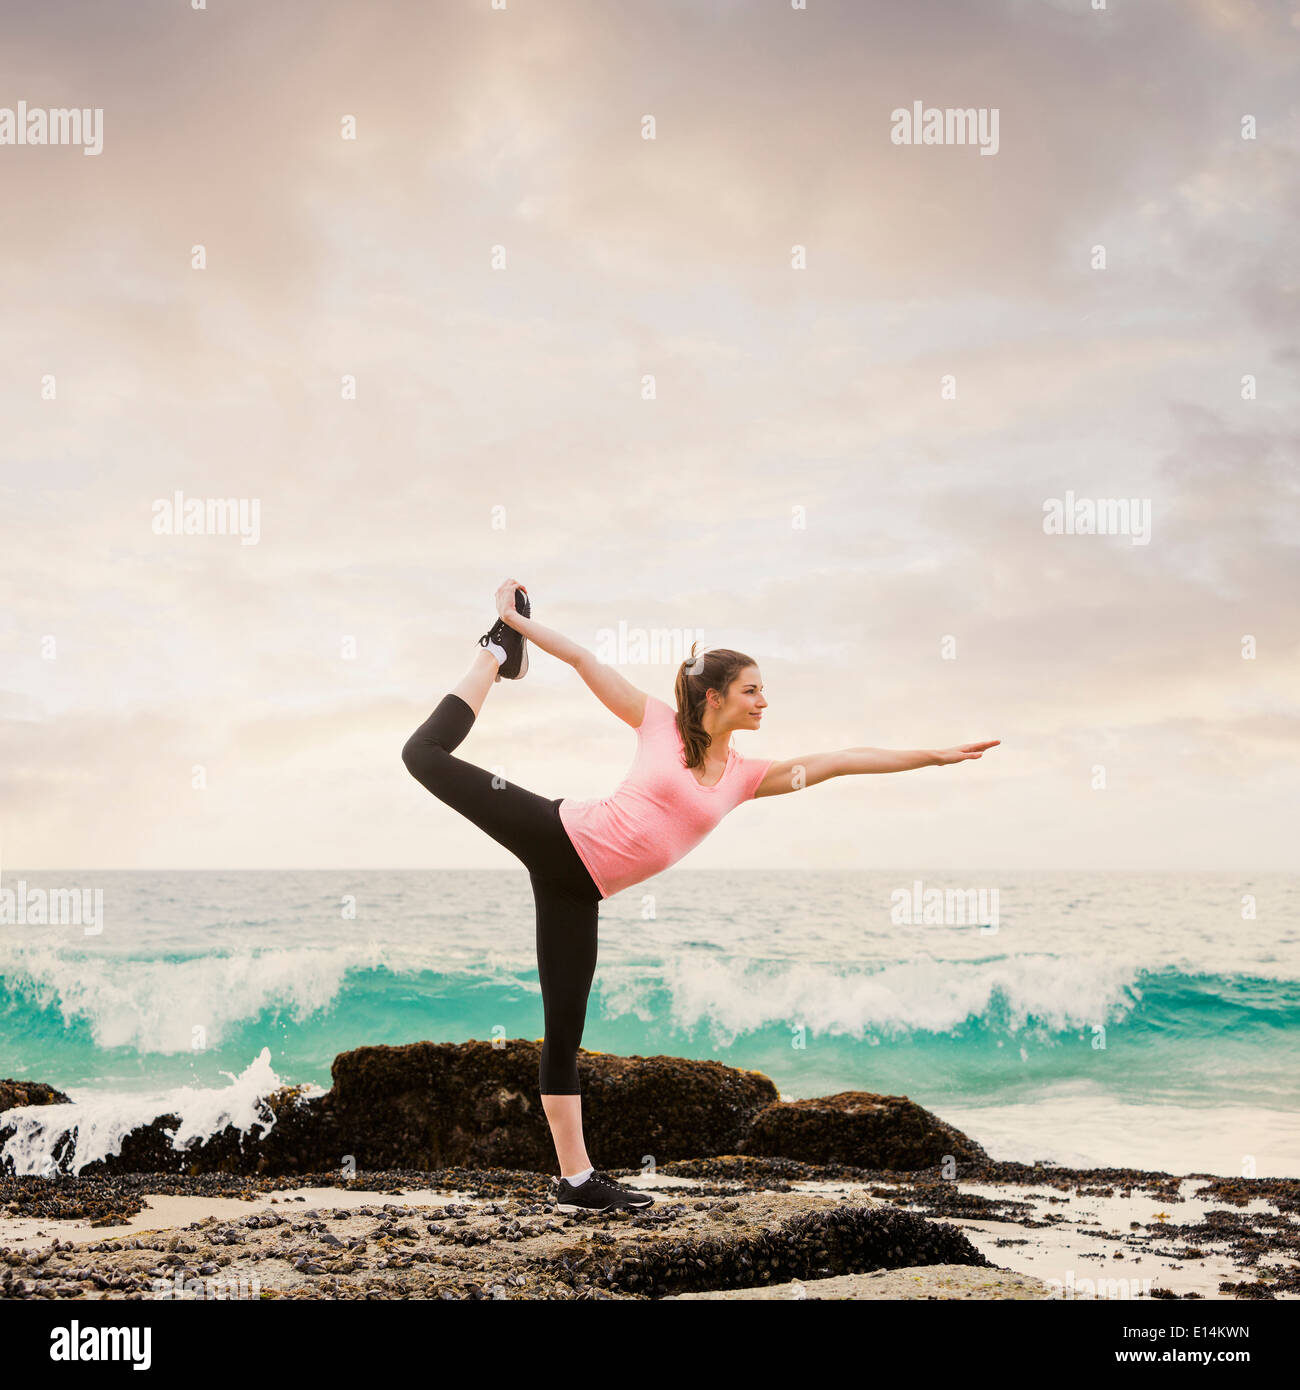 Caucasian woman stretching on beach Banque D'Images